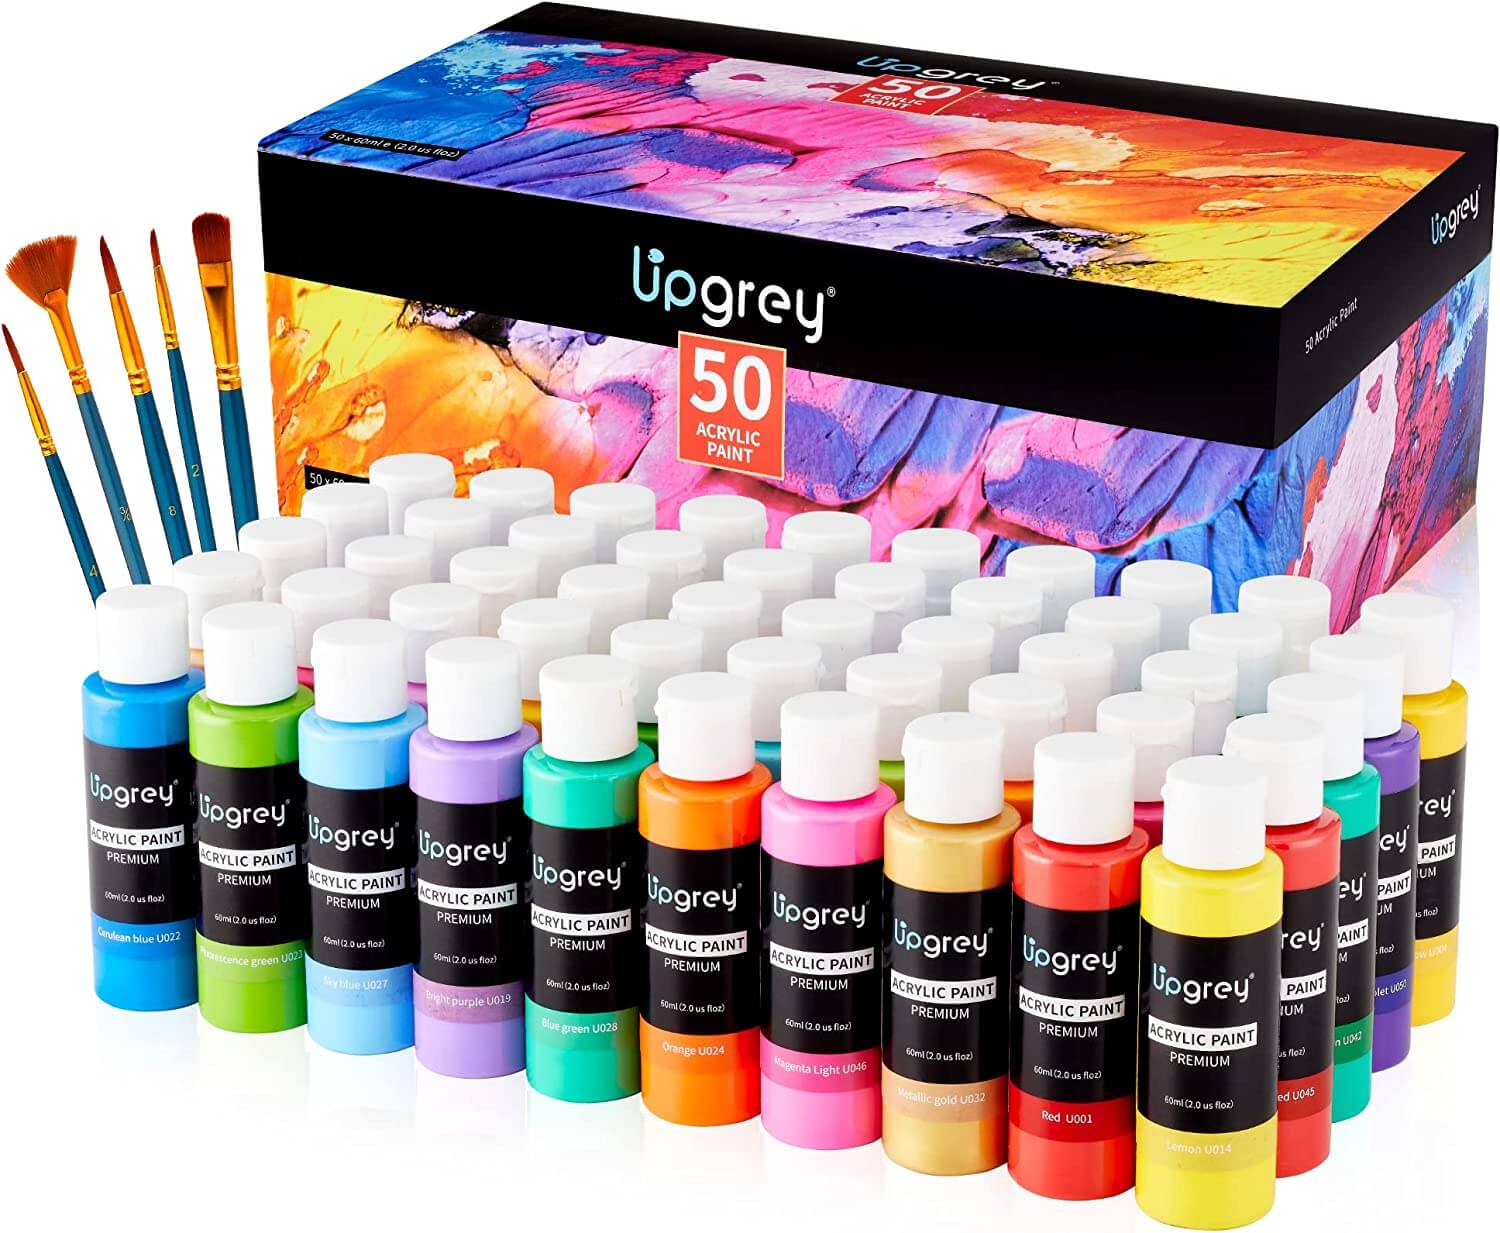 Acrylic Paint Set 20 Colors Acrylic Paints for Canvas Painting Pack -  Acrylic Craft Paint Sets for